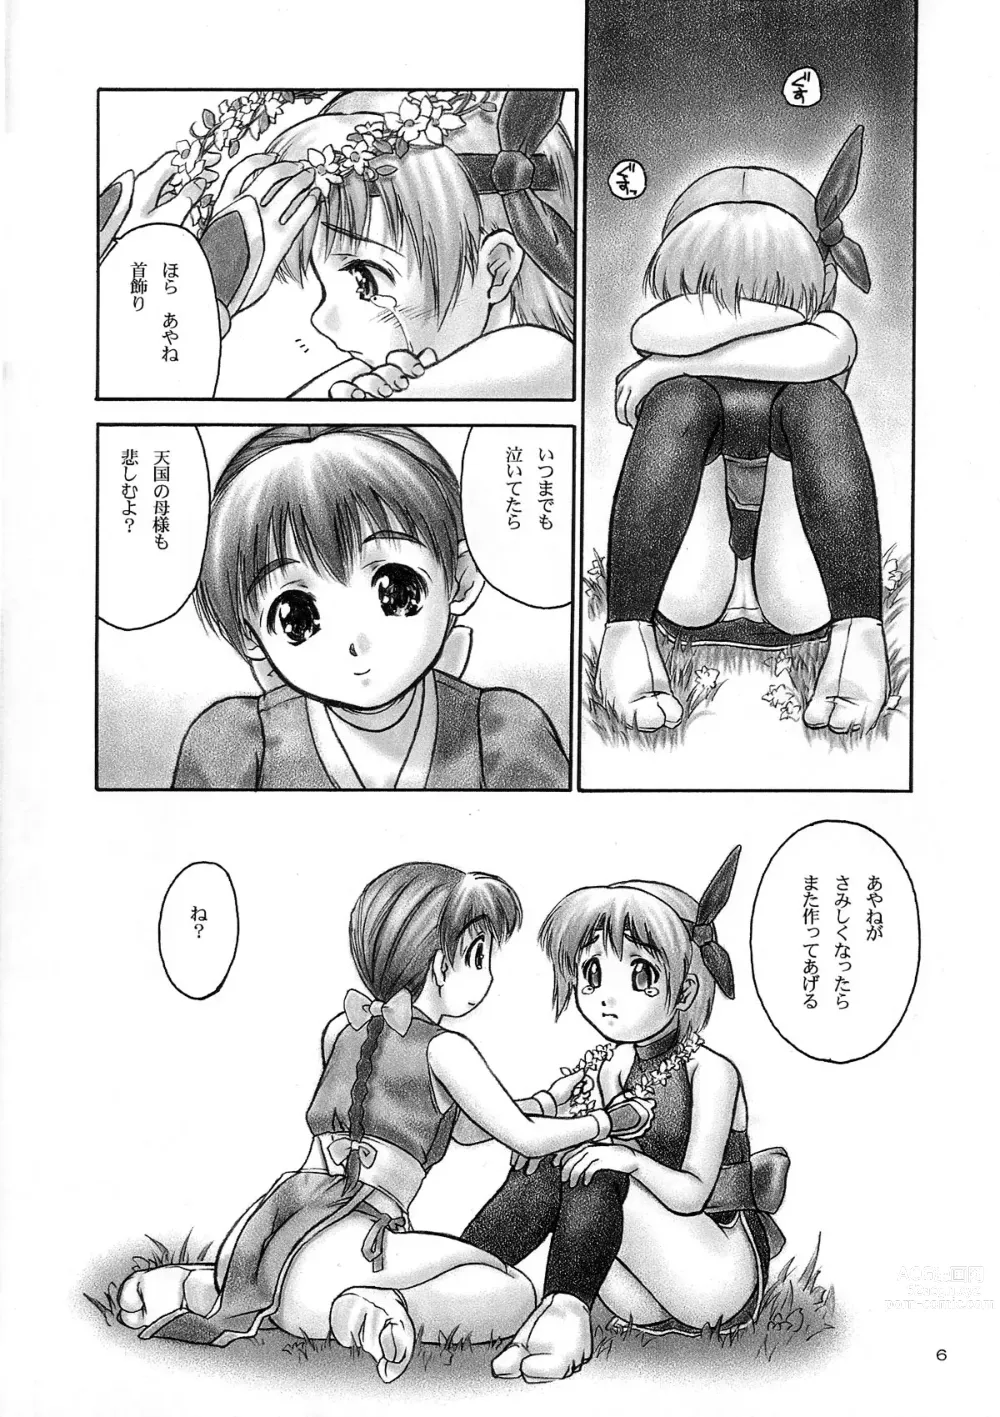 Page 4 of doujinshi INU/Sequel (decensored)